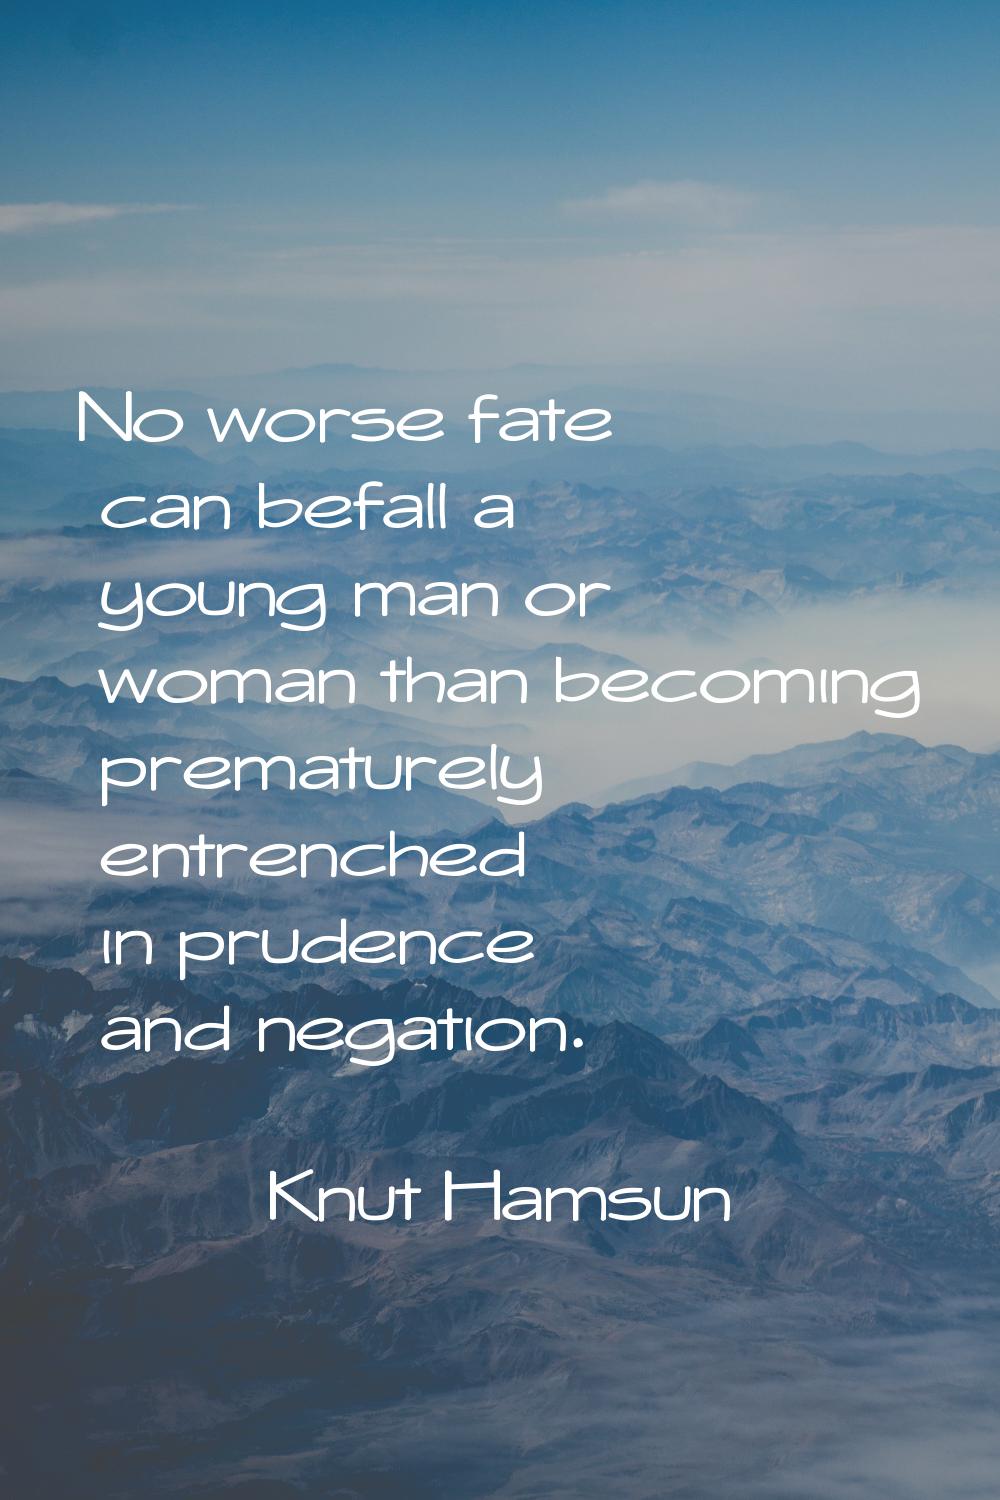 No worse fate can befall a young man or woman than becoming prematurely entrenched in prudence and 